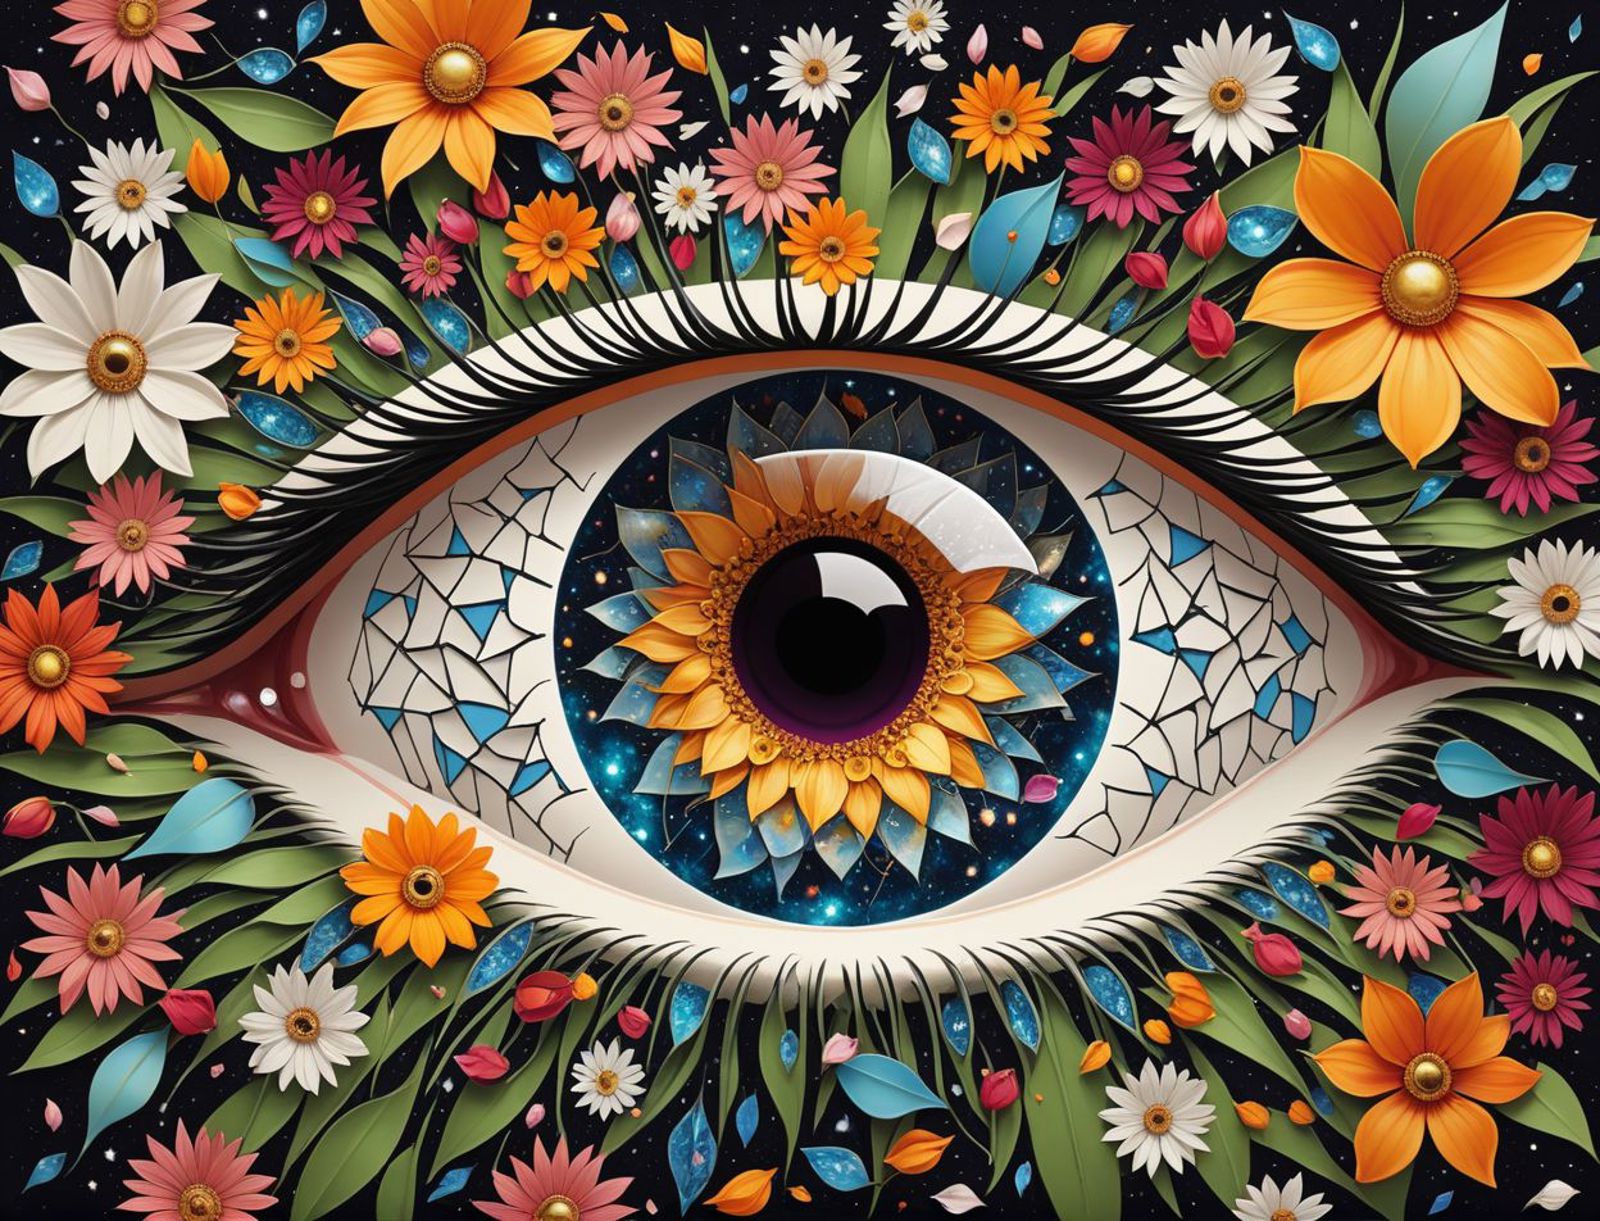 Colorful Eye with Sunflowers and Flowers - Eye Art